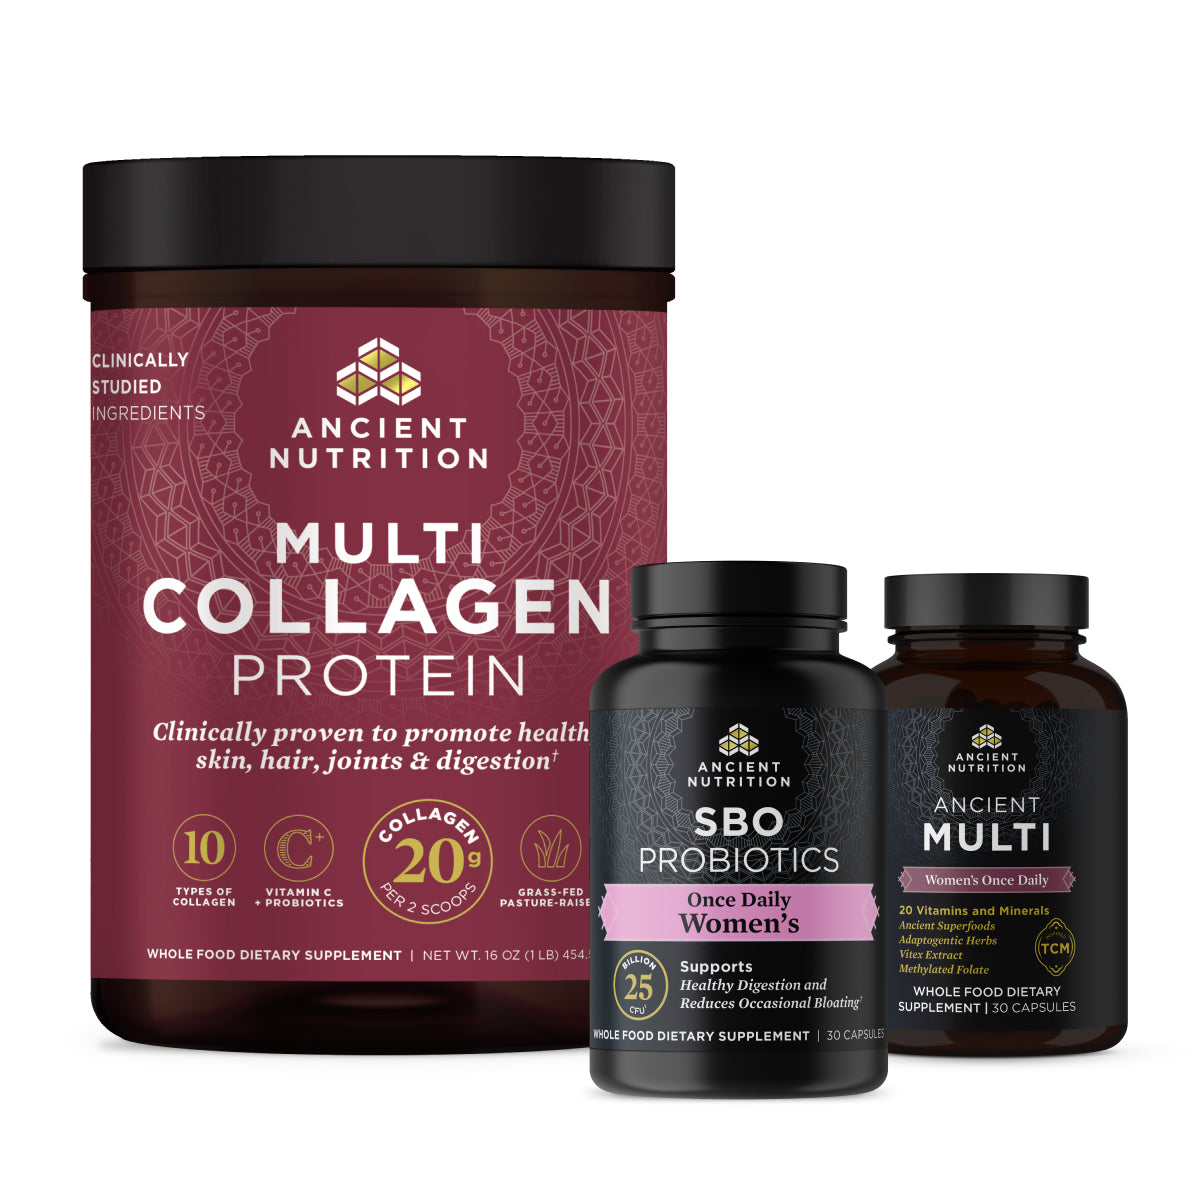 Multi collagen protein, SBO Women's Once Daily and Ancient Multi Women's Once Daily bottles